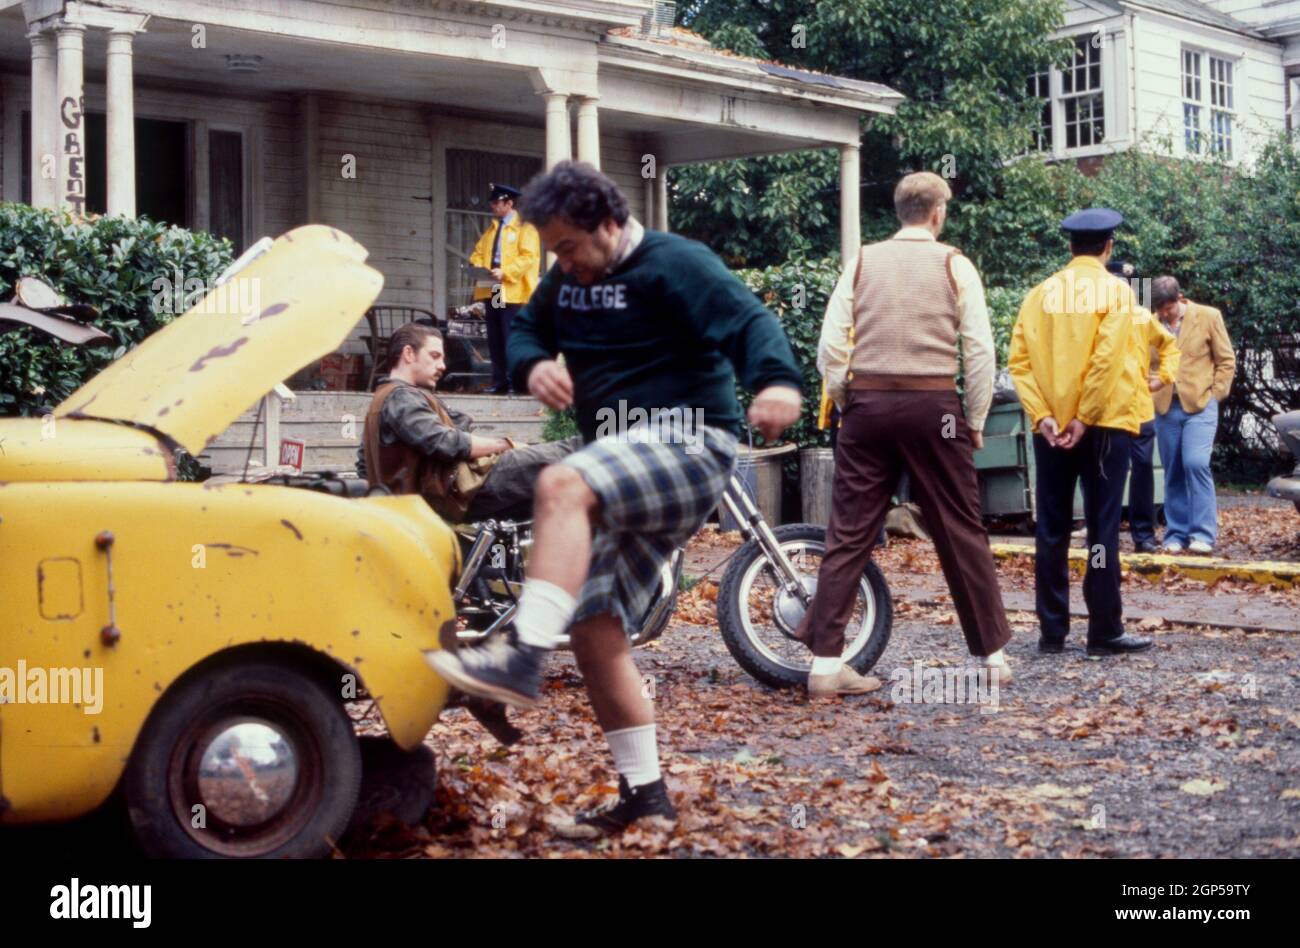 NATIONAL LAMPOON'S ANIMAL HOUSE, Delta Tau Chi Fraternity members from left: Bruce McGill, John Belushi, James Widdoes (back turned), 1978. © Universal Pictures / Courtesy Everett Collection Stock Photo